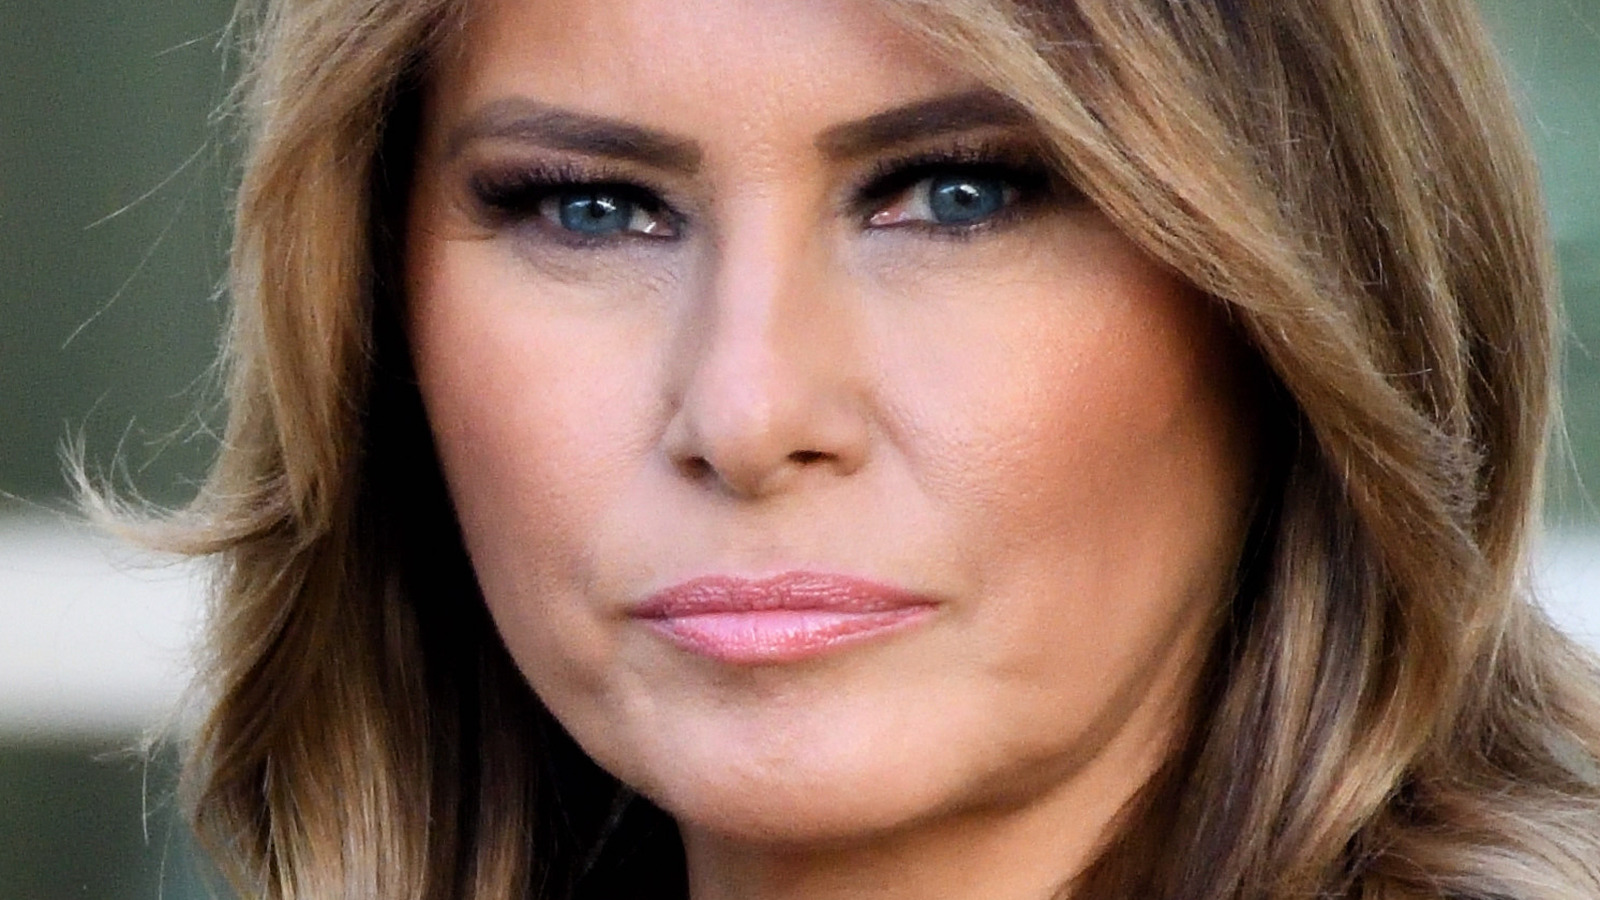 Melania Trumps Time In The White House Could Play Out On The Small Screen Sooner Than You Think 3365